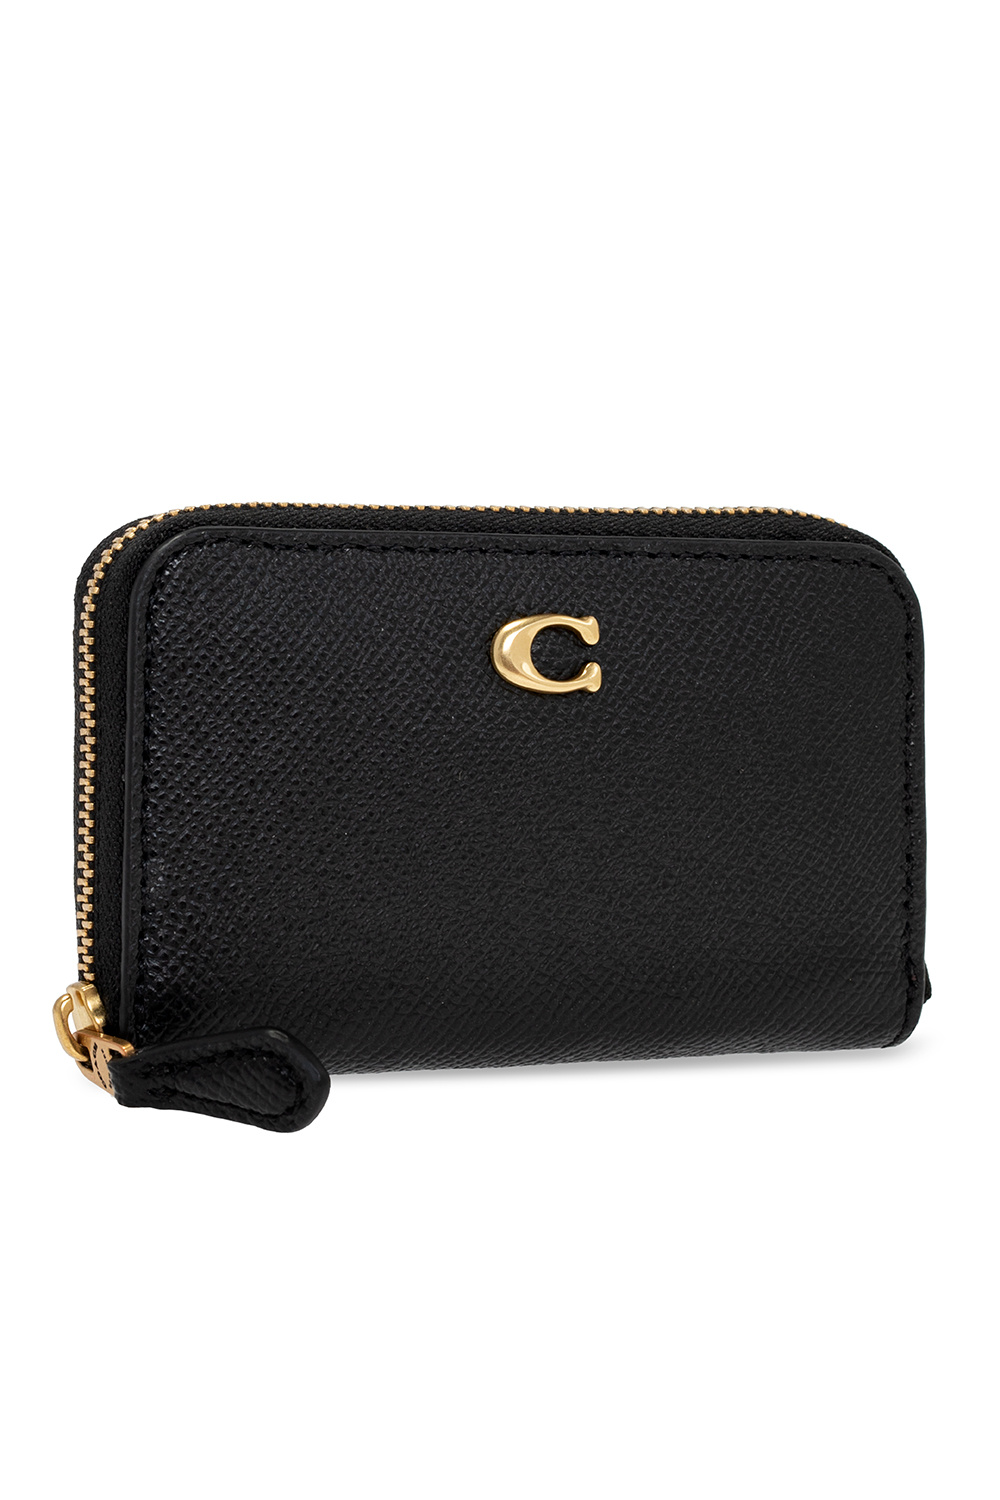 coach personal Card holder